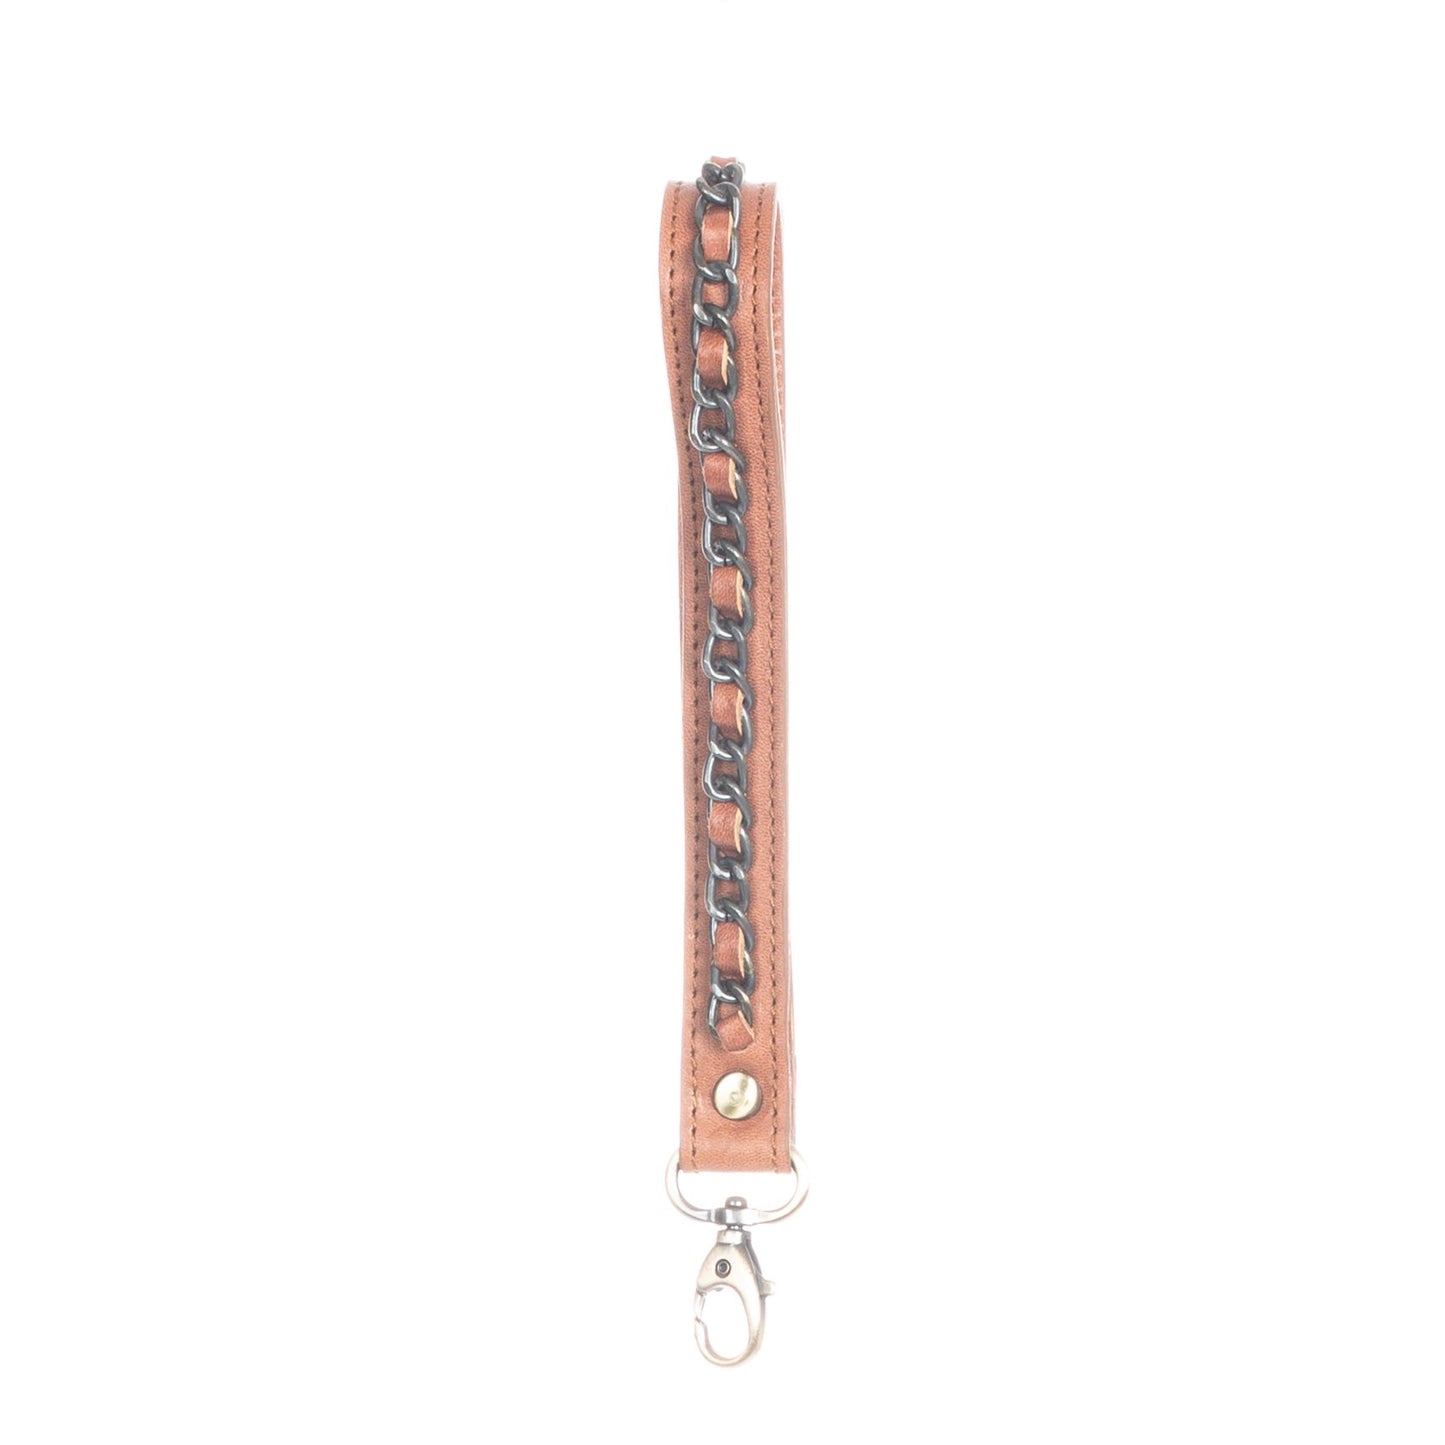 ARTISAN CHAIN WRISTLET - MOROCCO COLLECTION - BROWN LEATHER